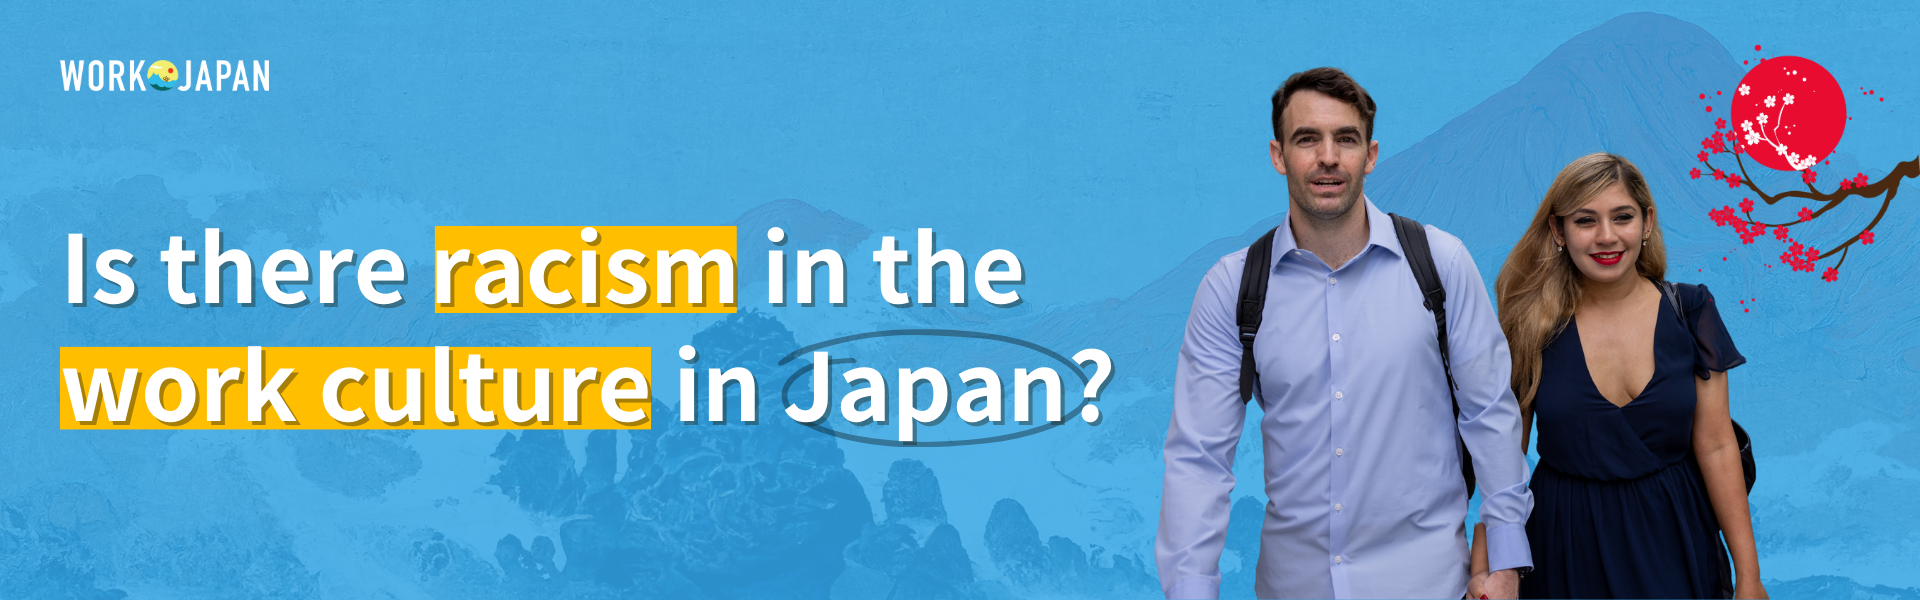 Is There Racism in the Work Culture in Japan?